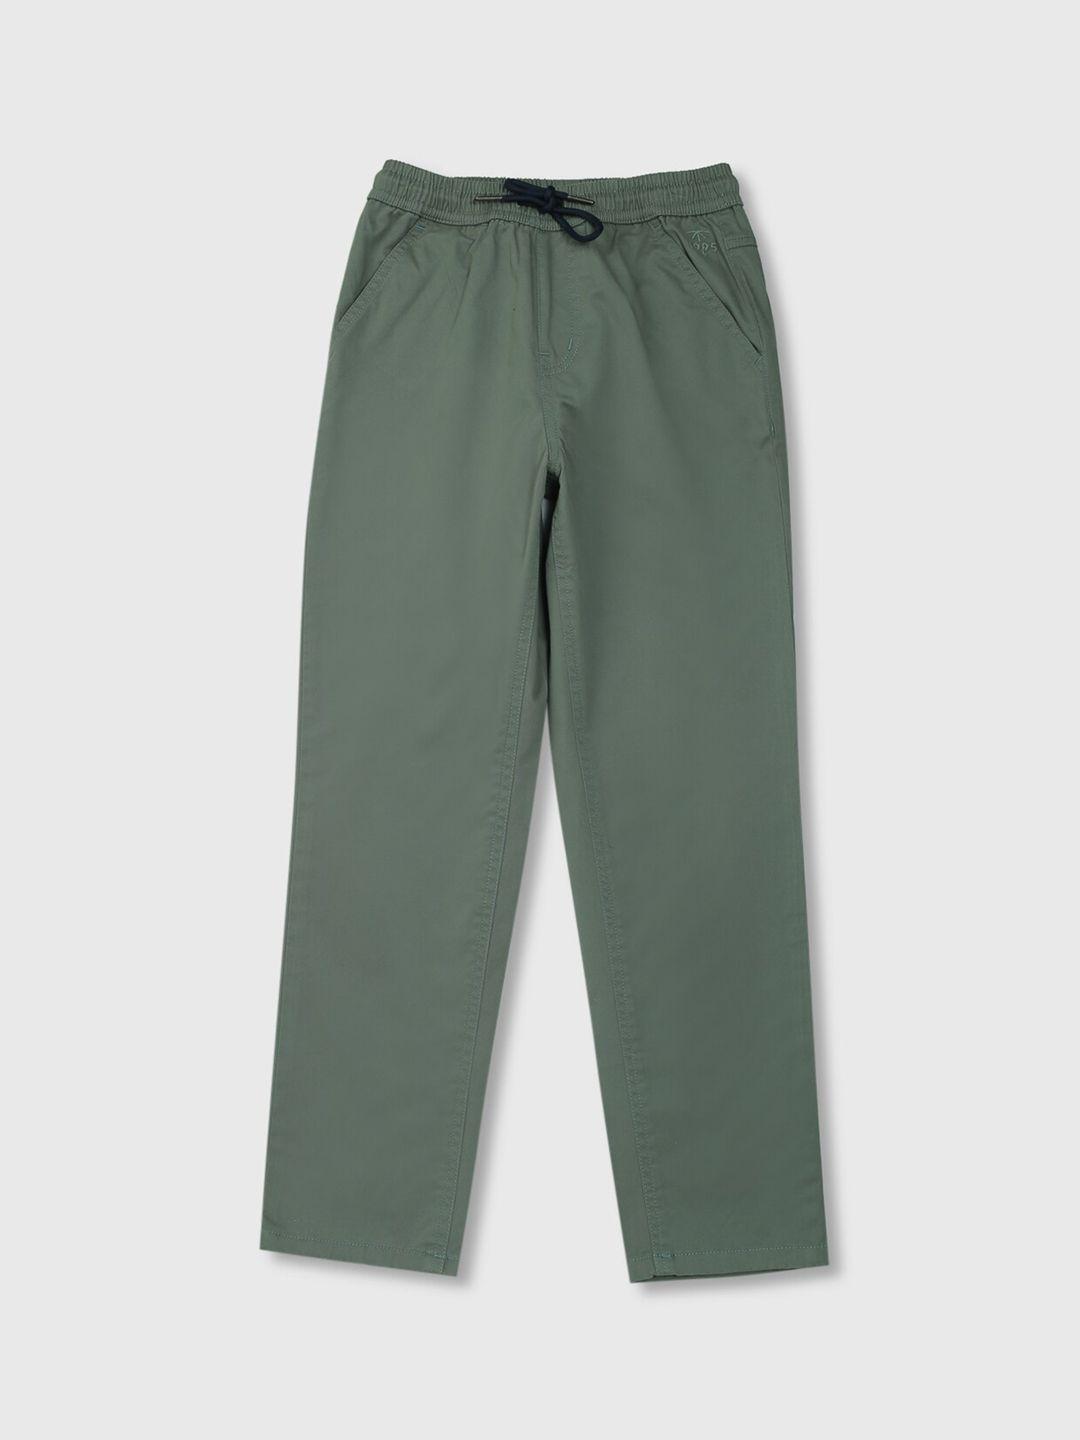 palm-tree-boys-green-solid-trousers